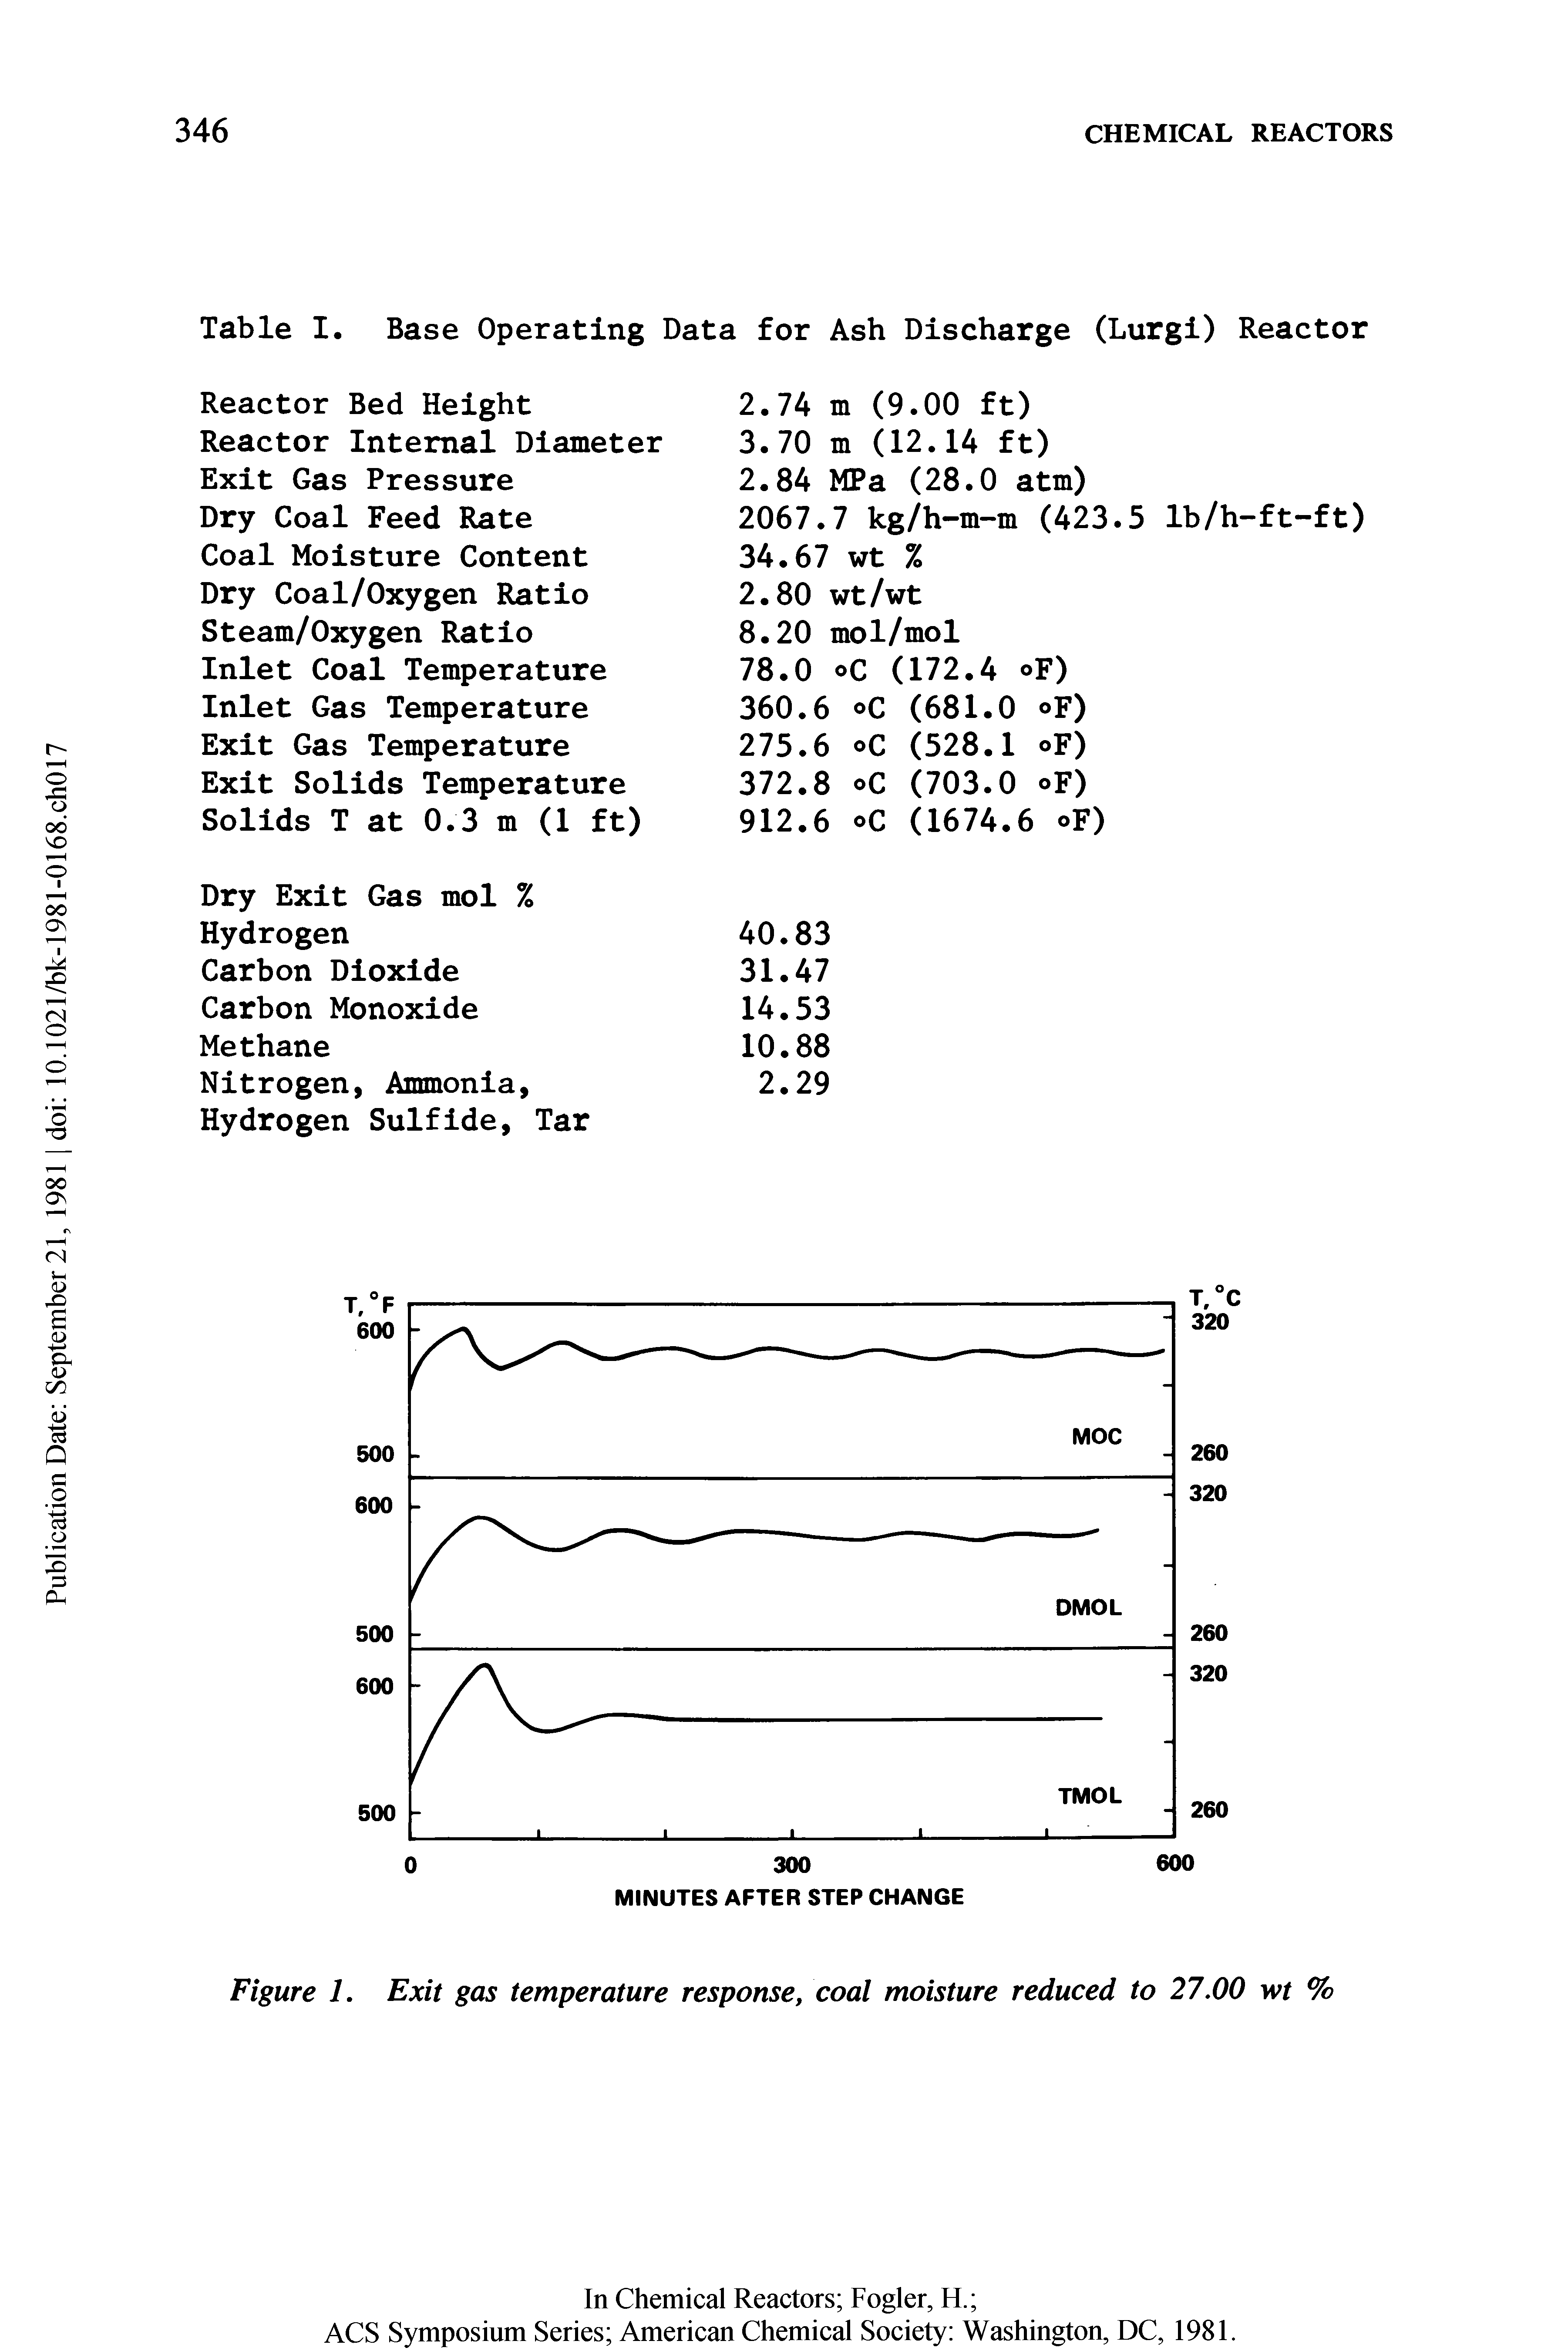 Table I. Base Operating Data for Ash Discharge (Lurgi) Reactor...